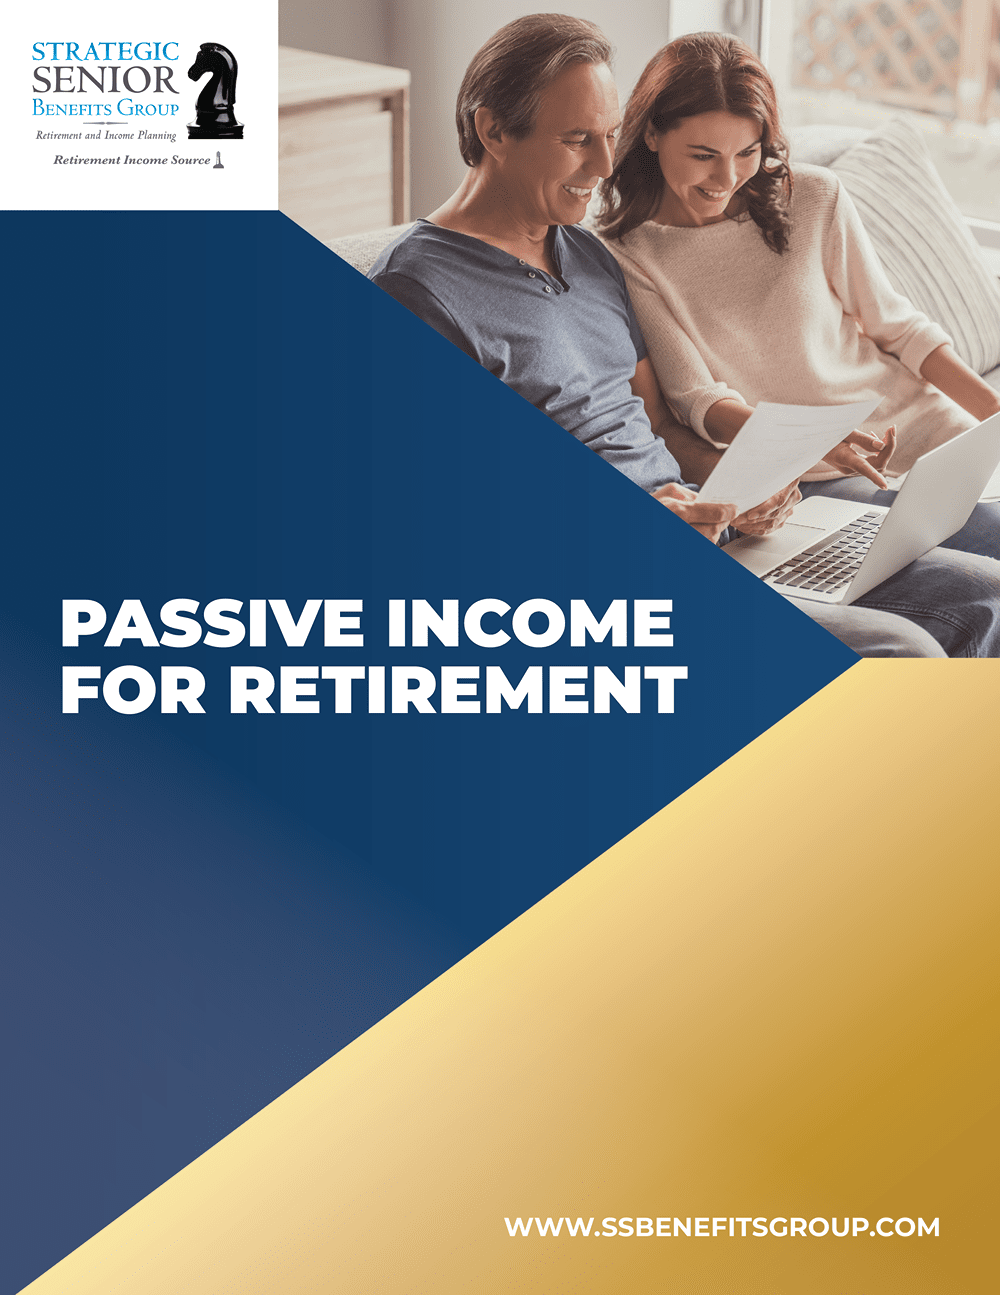 Strategic Senior Benefits Group - What You Need to Know About Passive Income-1